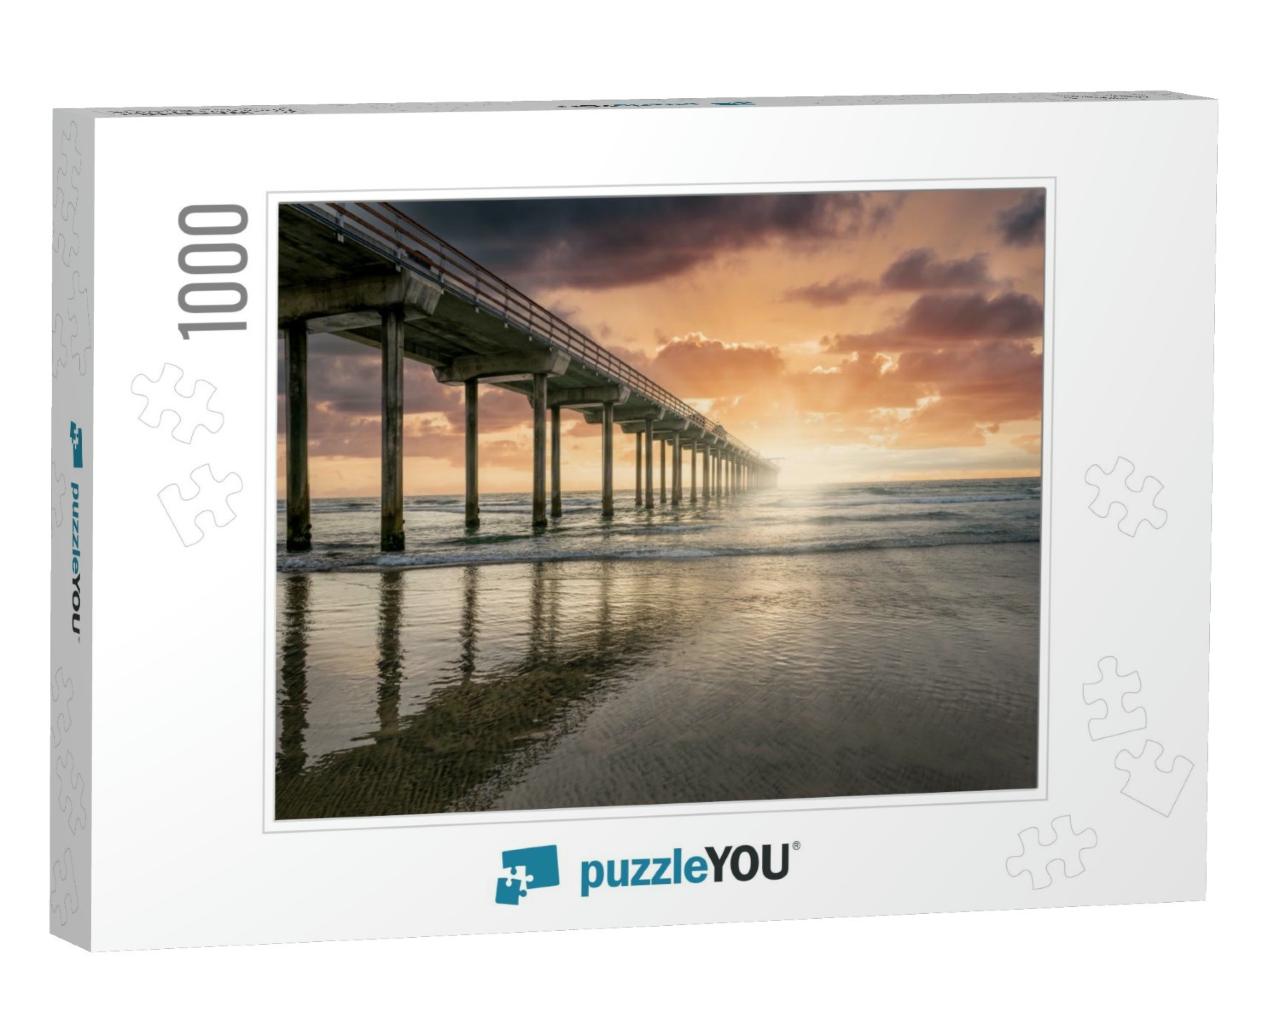 Scripps Pier At Sunset - La Jolla San Diego, California... Jigsaw Puzzle with 1000 pieces